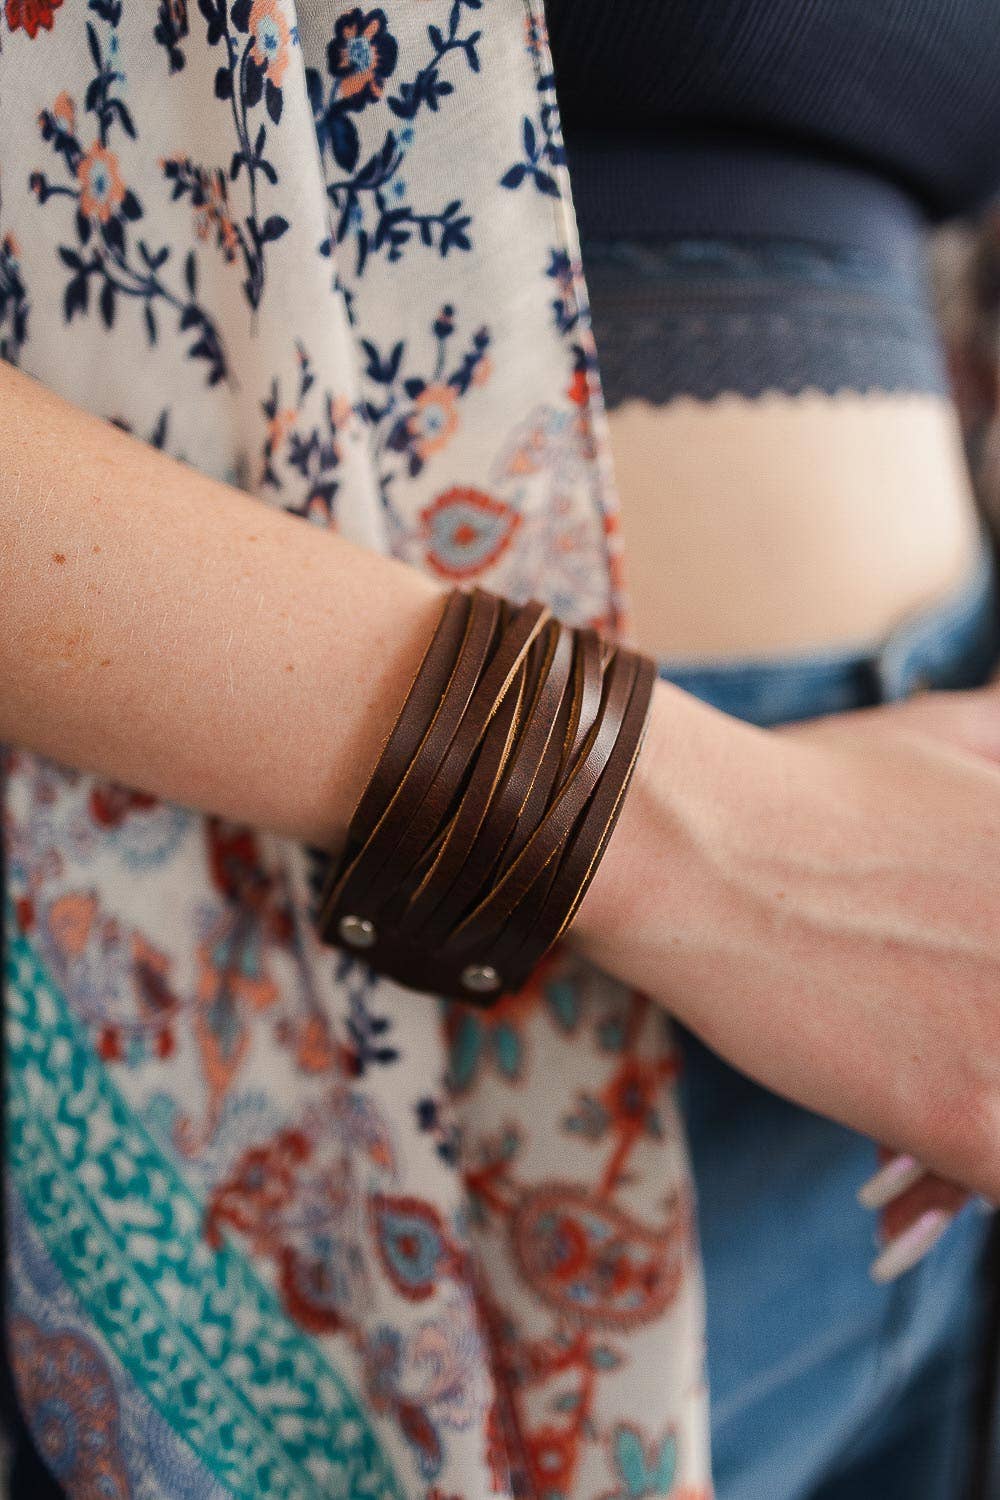 Braided Leather Cuff Bracelet w/ Adjustable Clasp - Whimsical Details